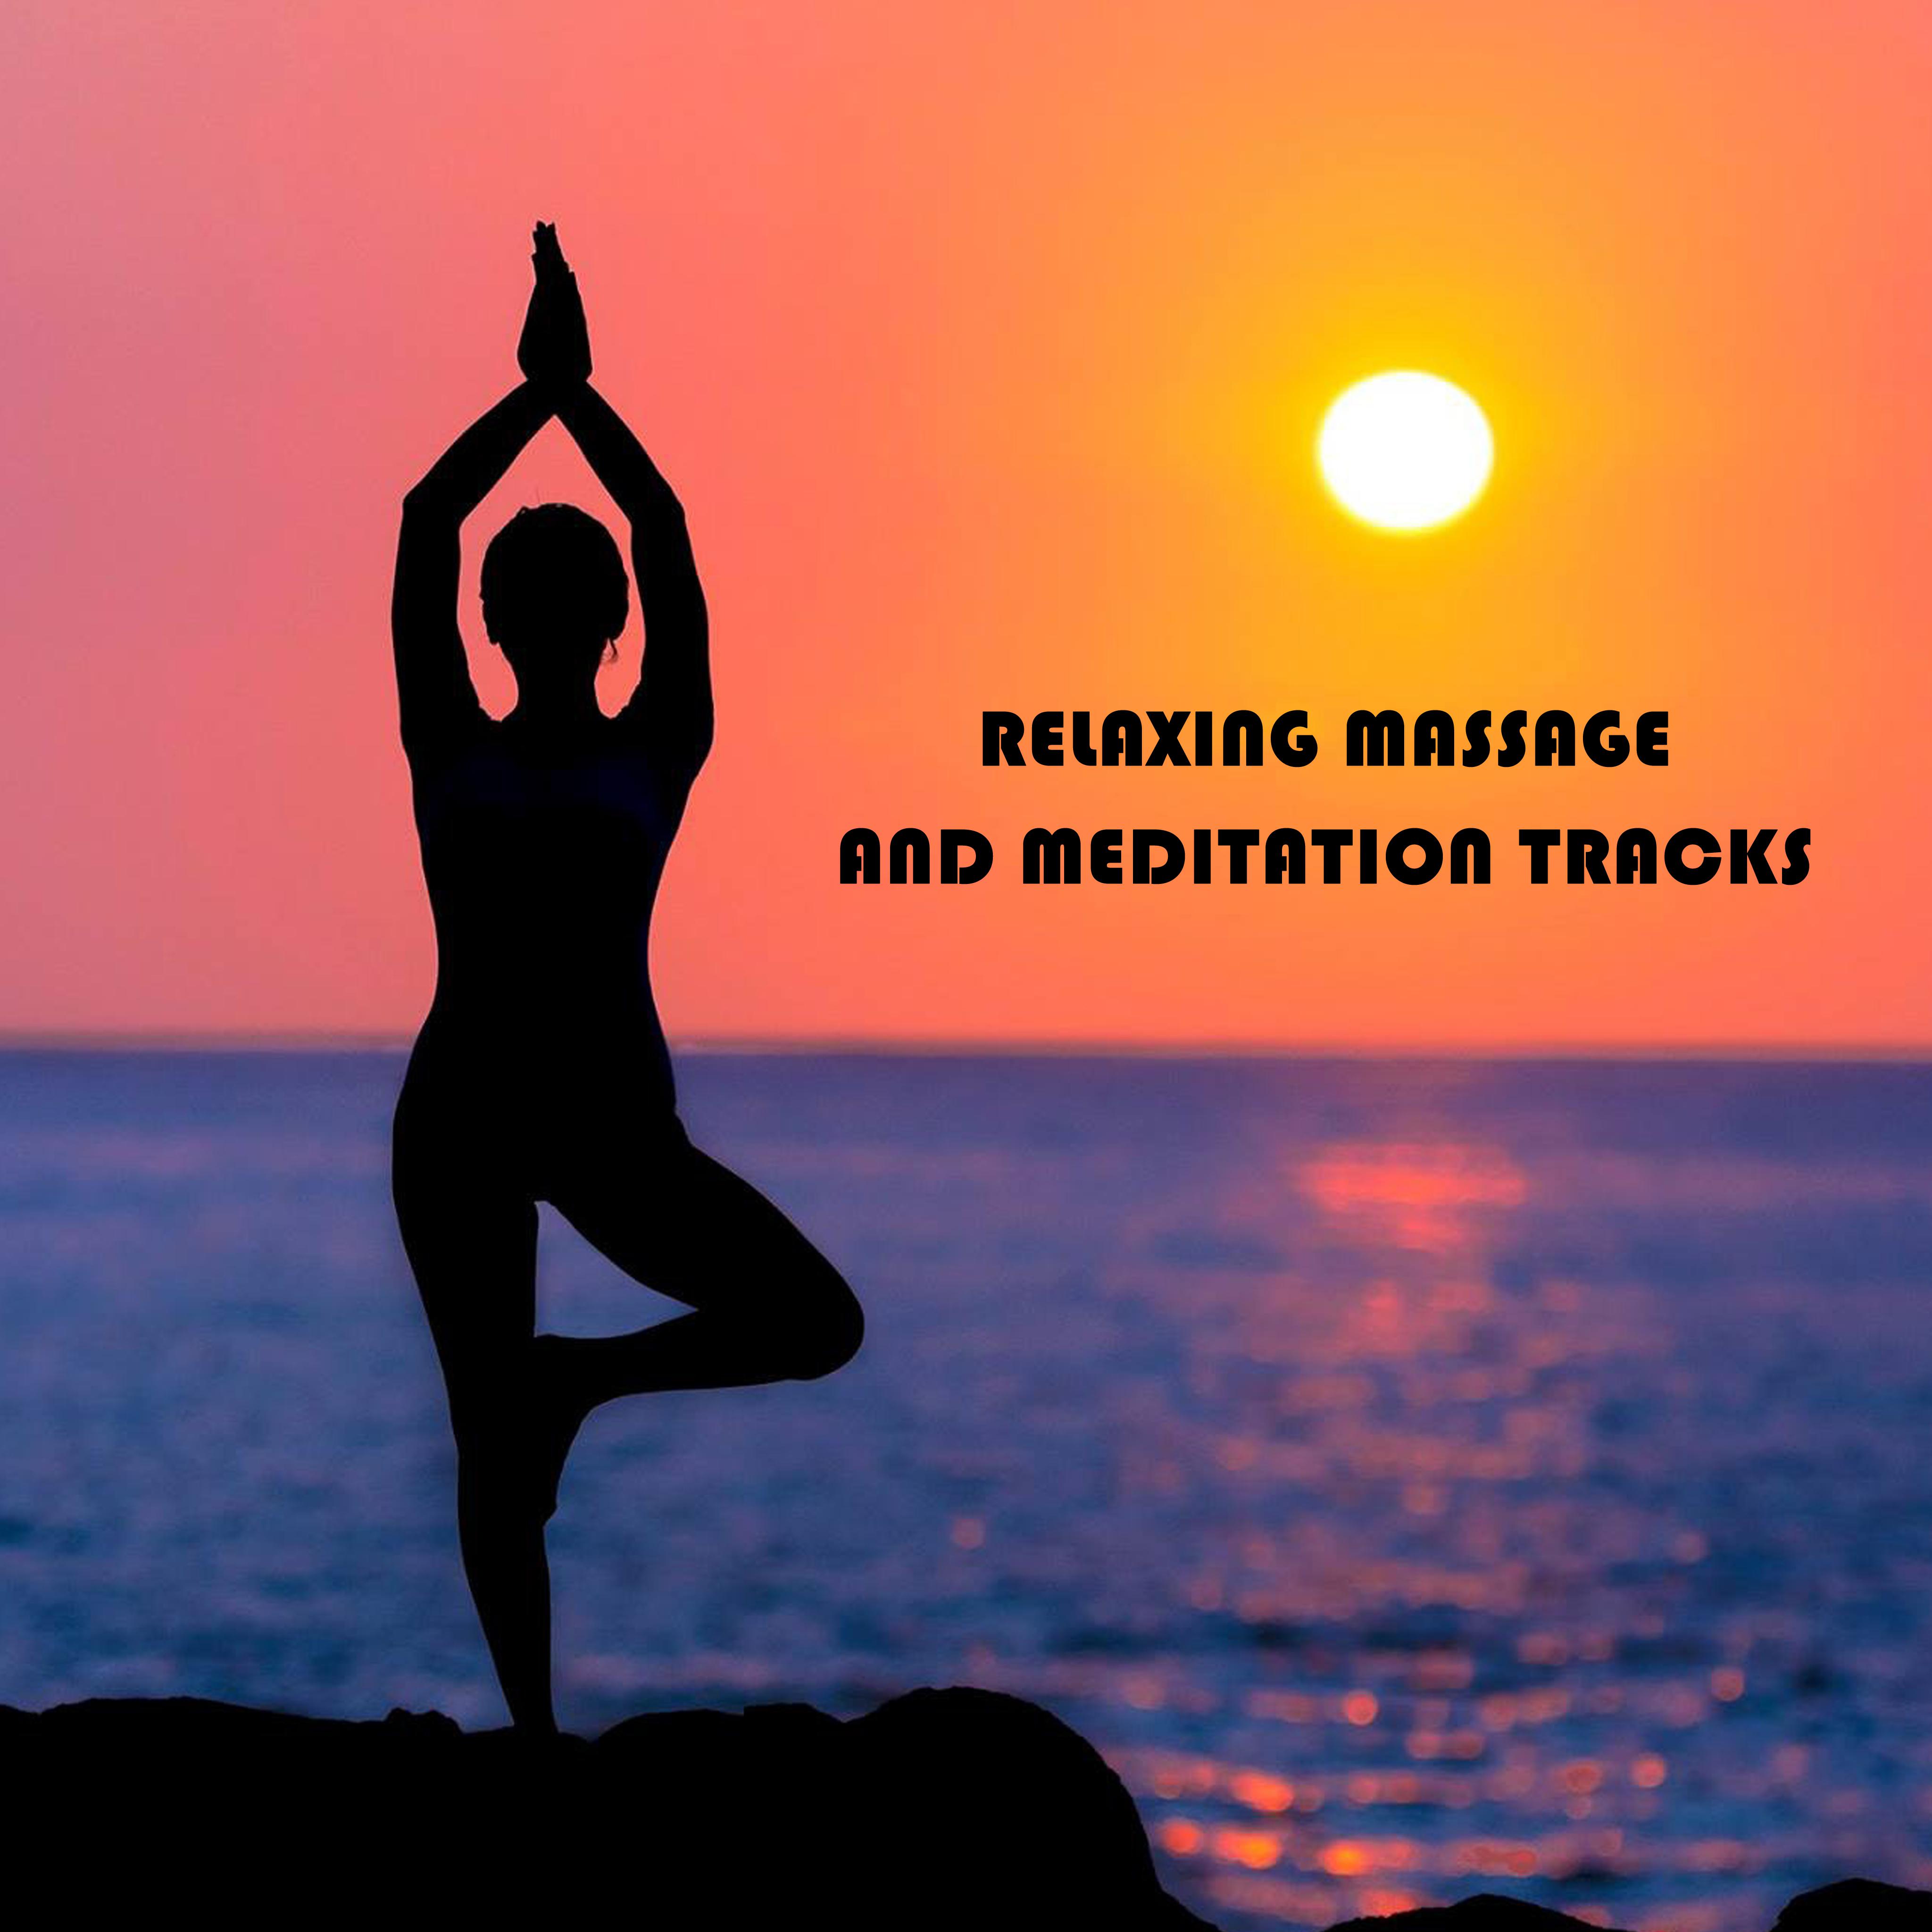 15 Relaxing Massage and Meditation Tracks